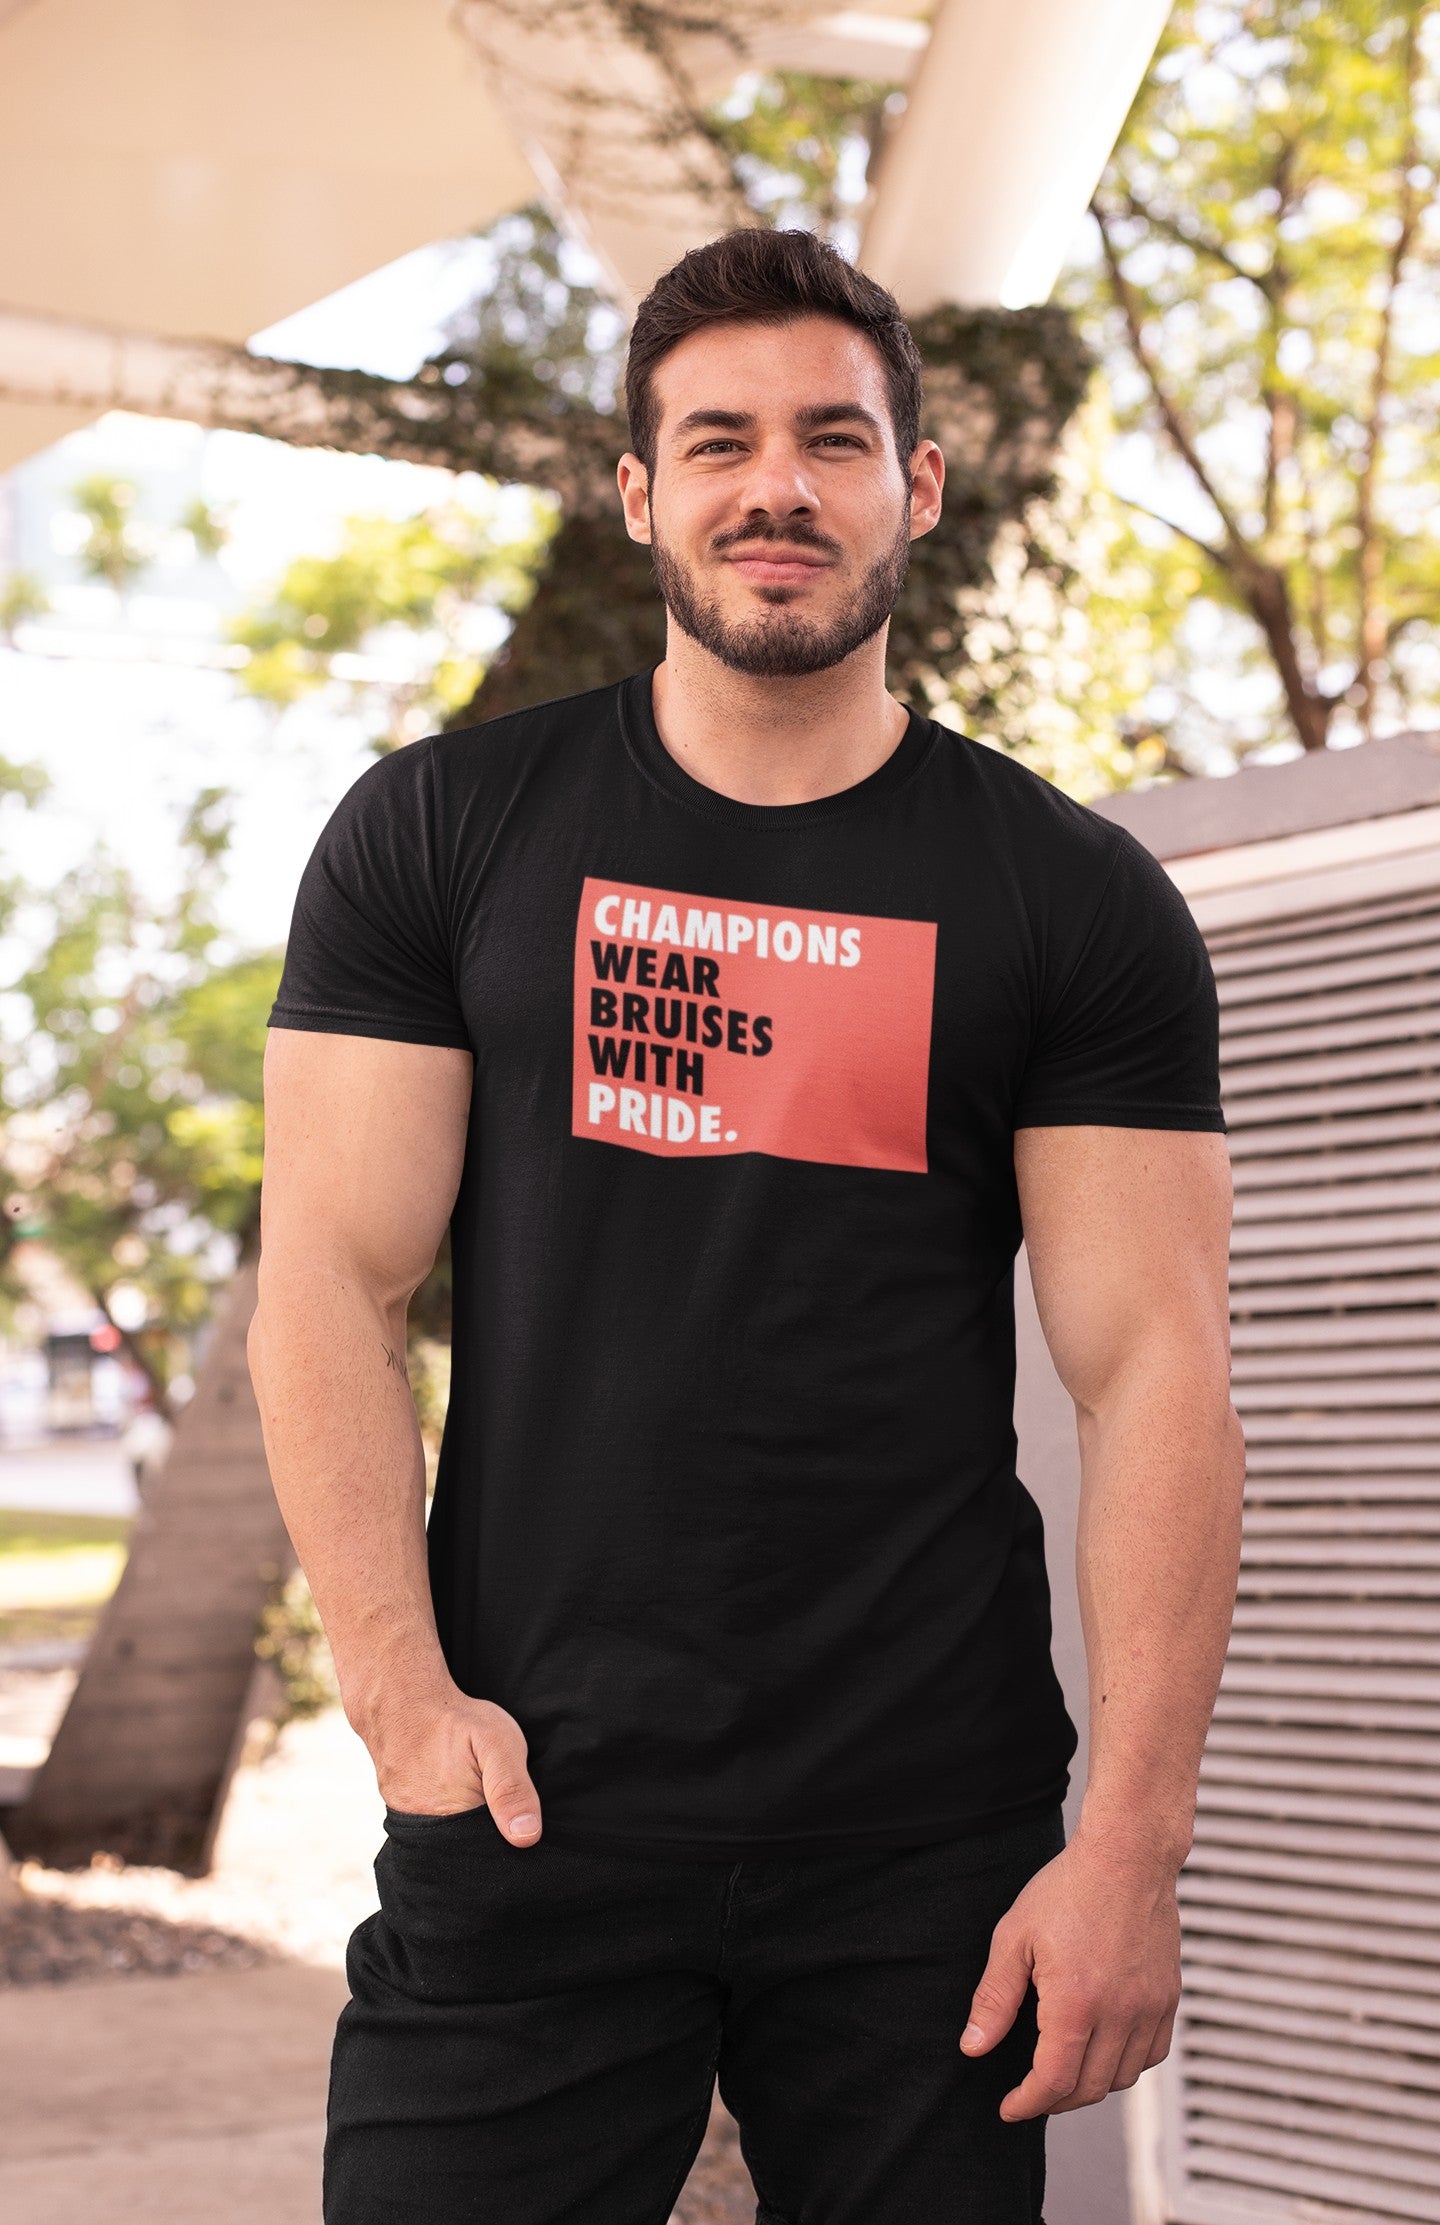 Gym T Shirt - Champions Wear Bruises With Pride with premium cotton Lycra. The Sports T Shirt by Strong Soul